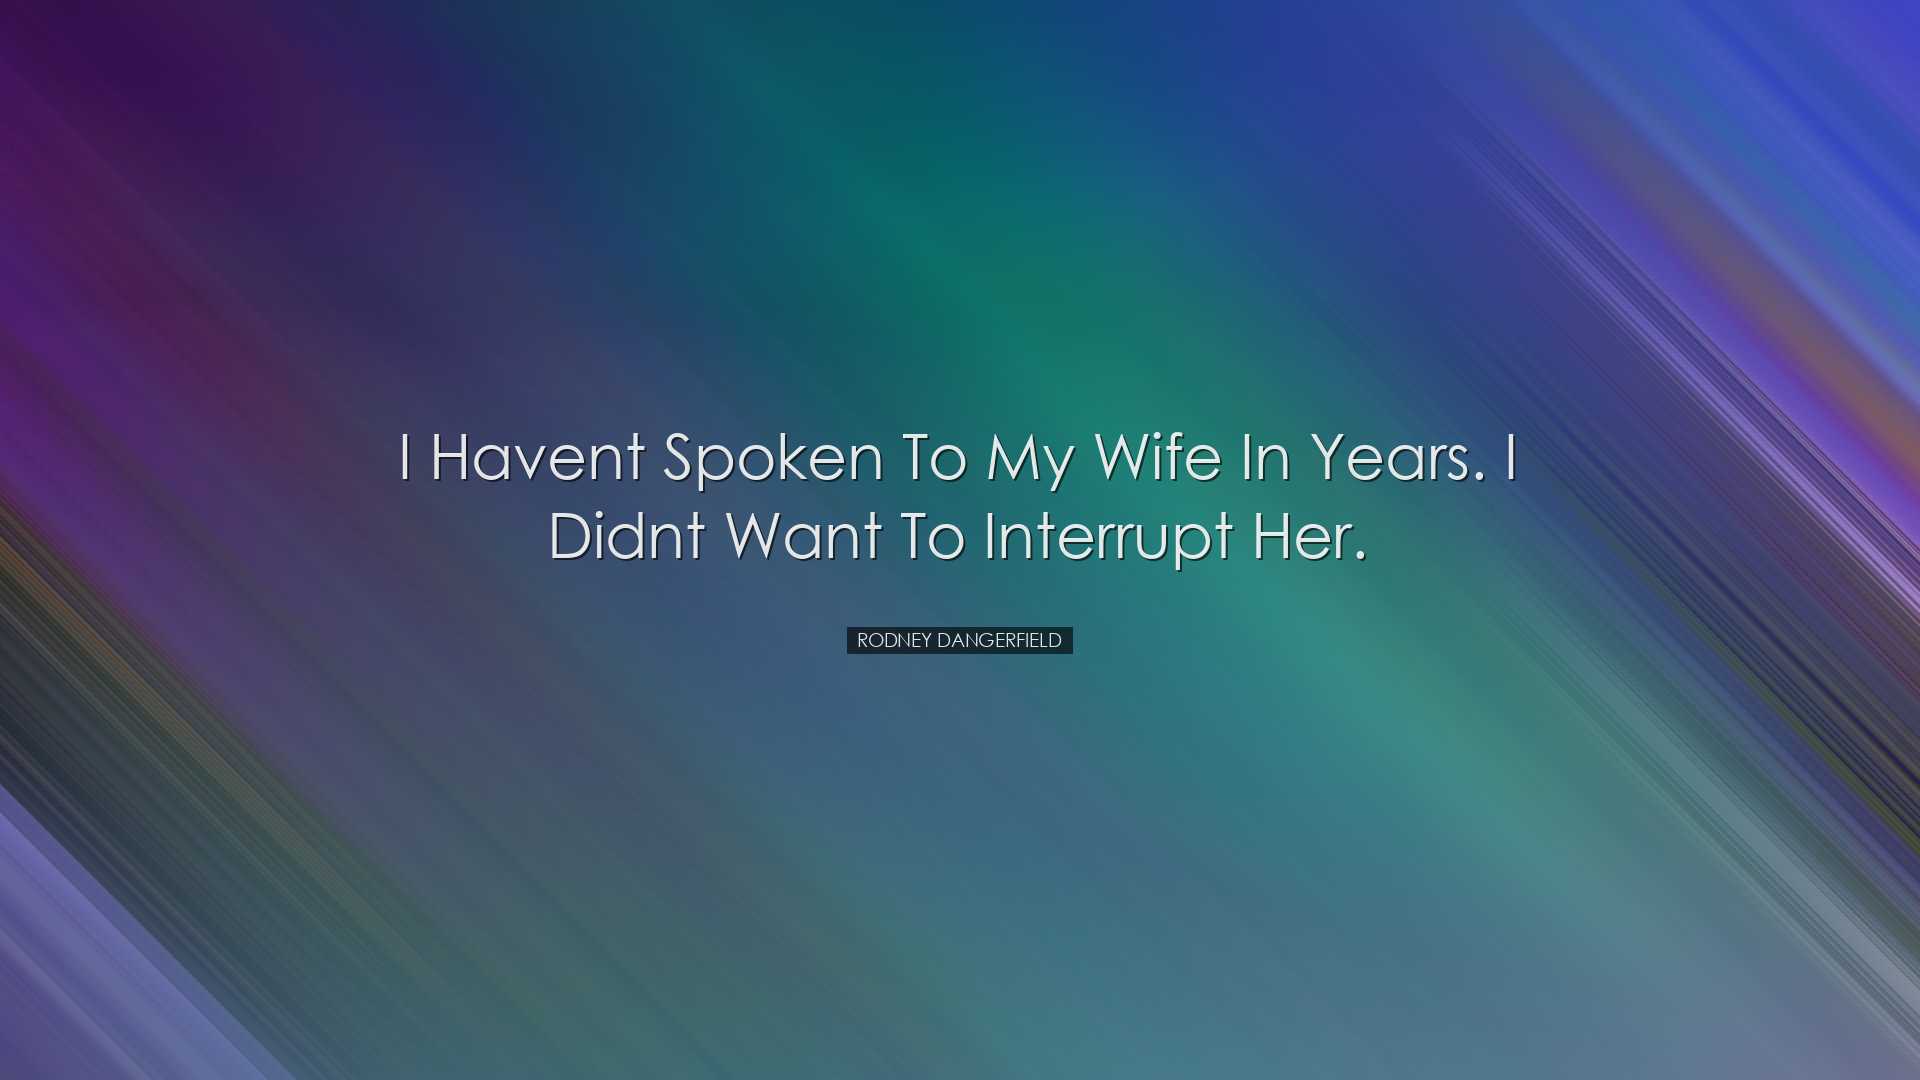 I havent spoken to my wife in years. I didnt want to interrupt her